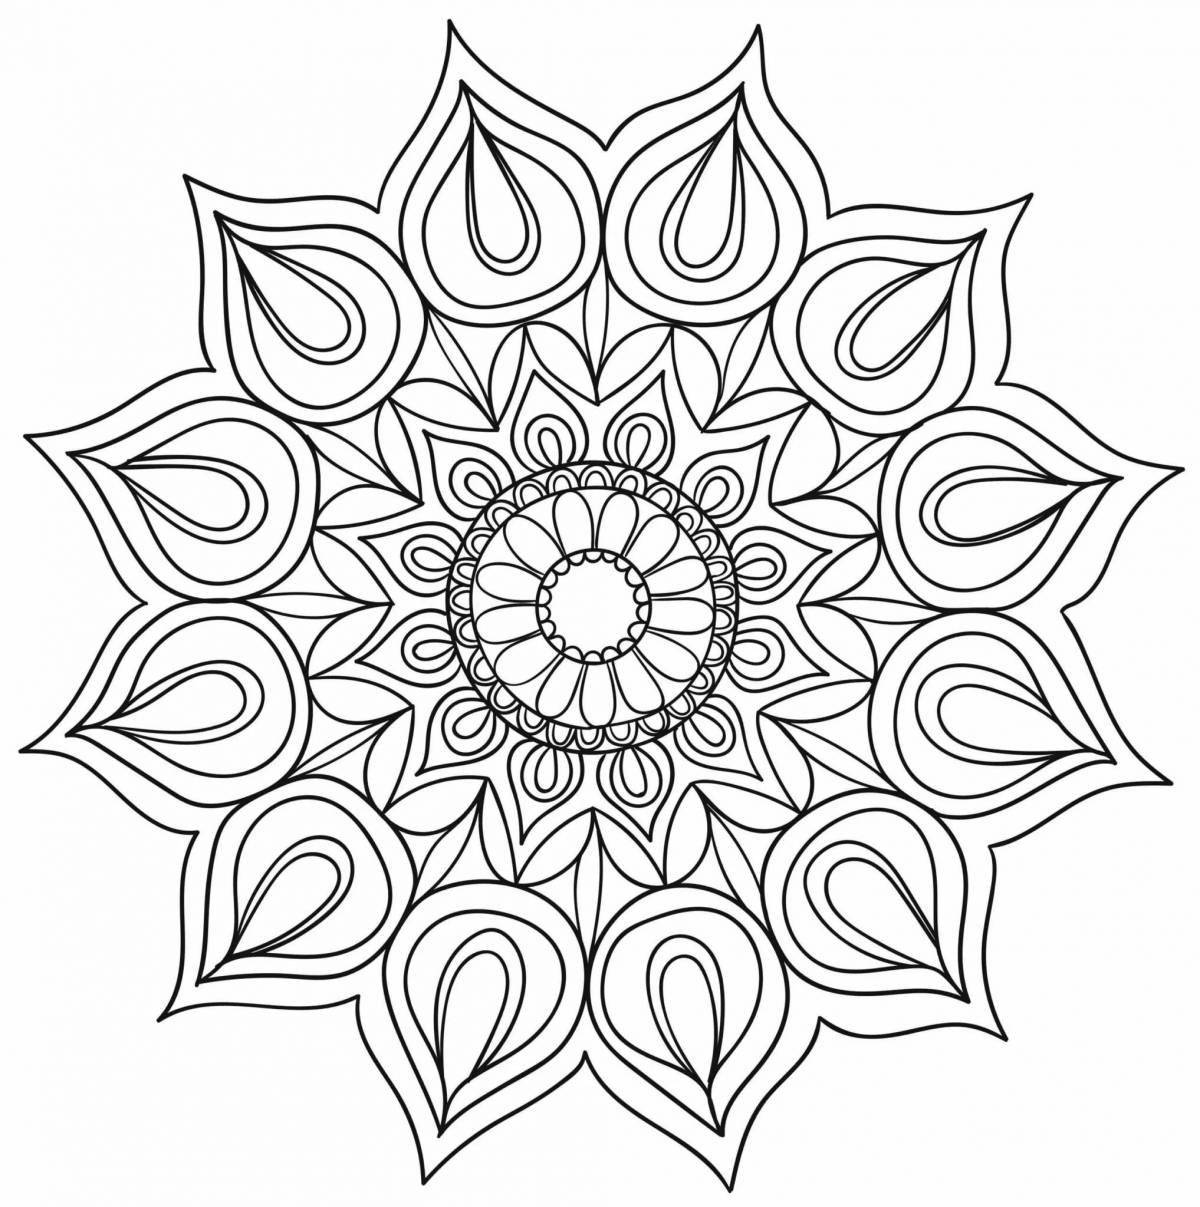 Delightful Mandala Coloring Page for Adults en